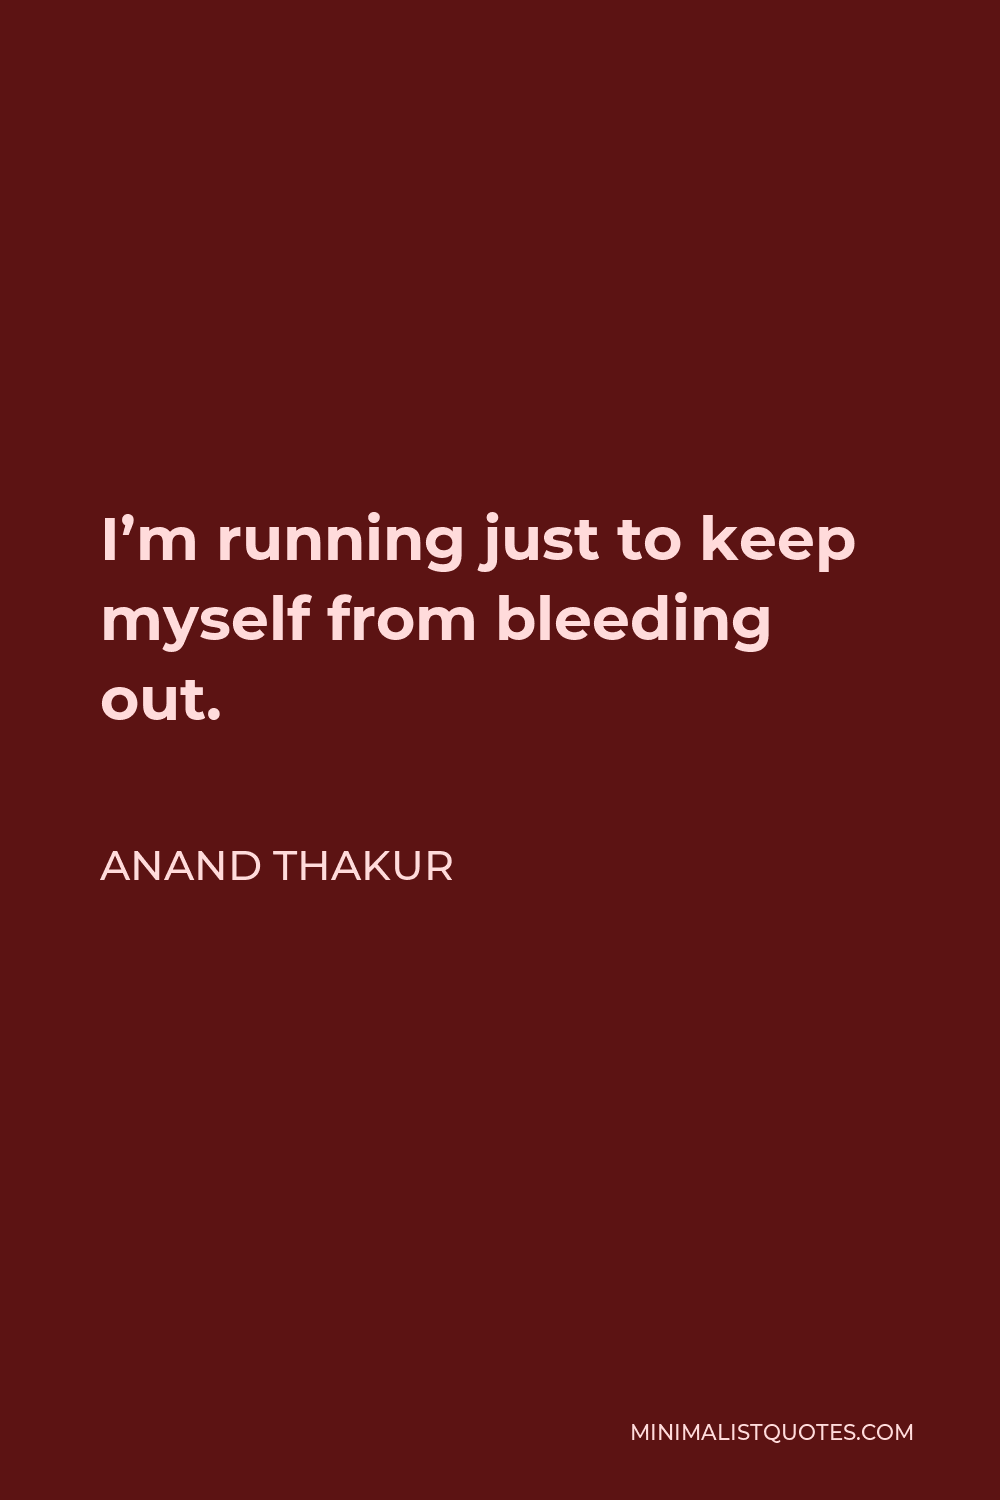 Anand Thakur Quote - I’m running just to keep myself from bleeding out.